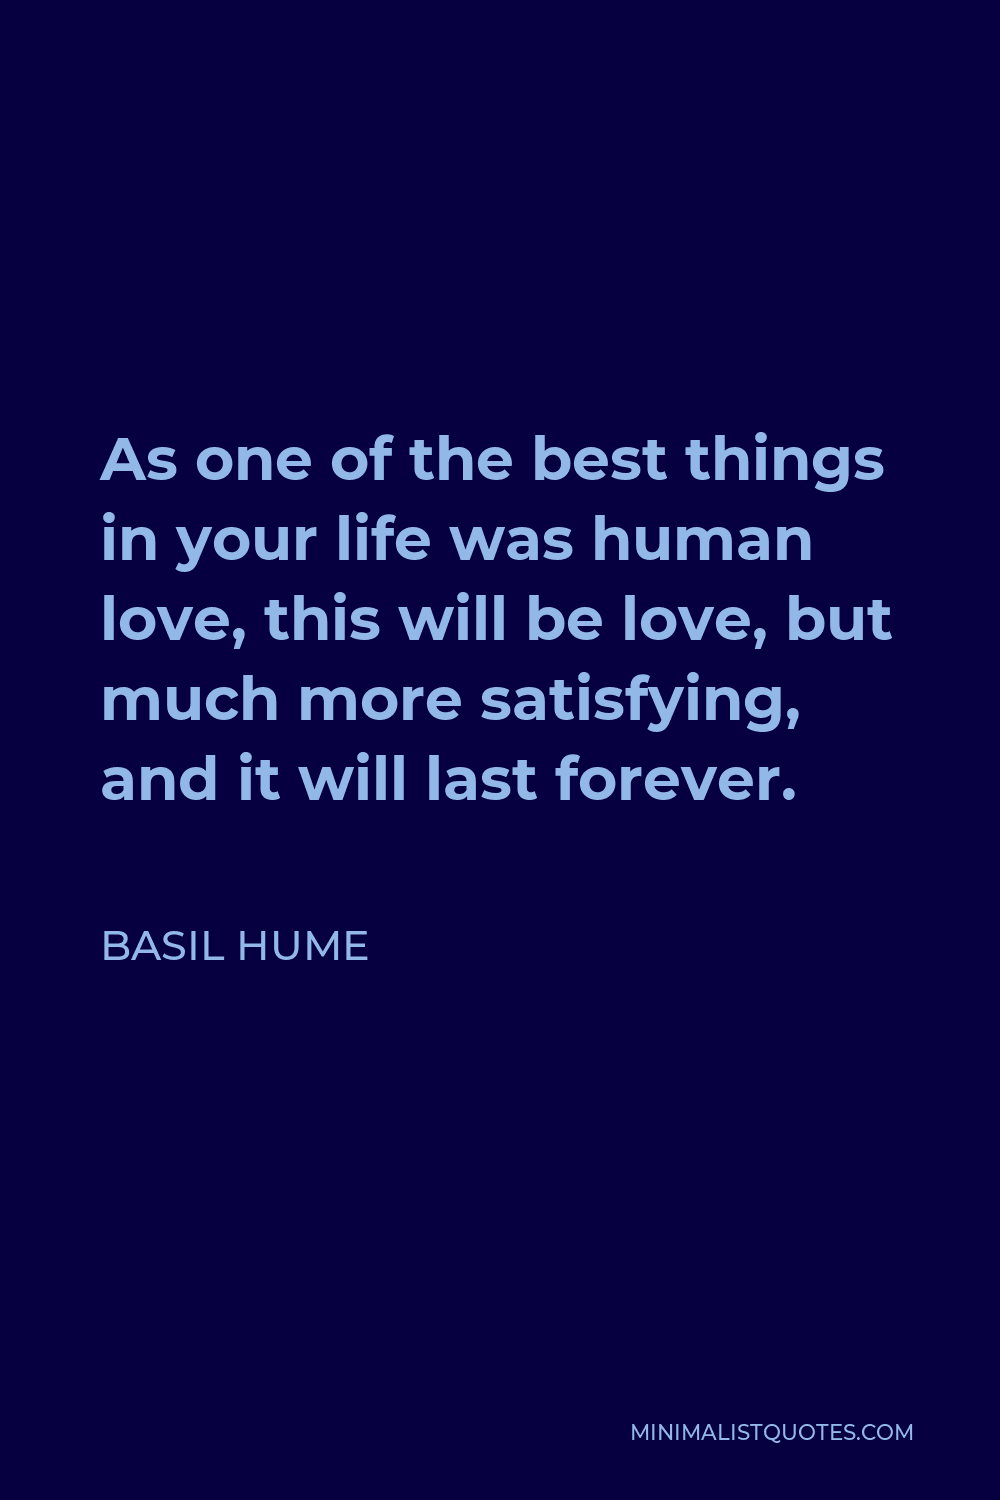 Basil Hume Quote - As one of the best things in your life was human love, this will be love, but much more satisfying, and it will last forever.